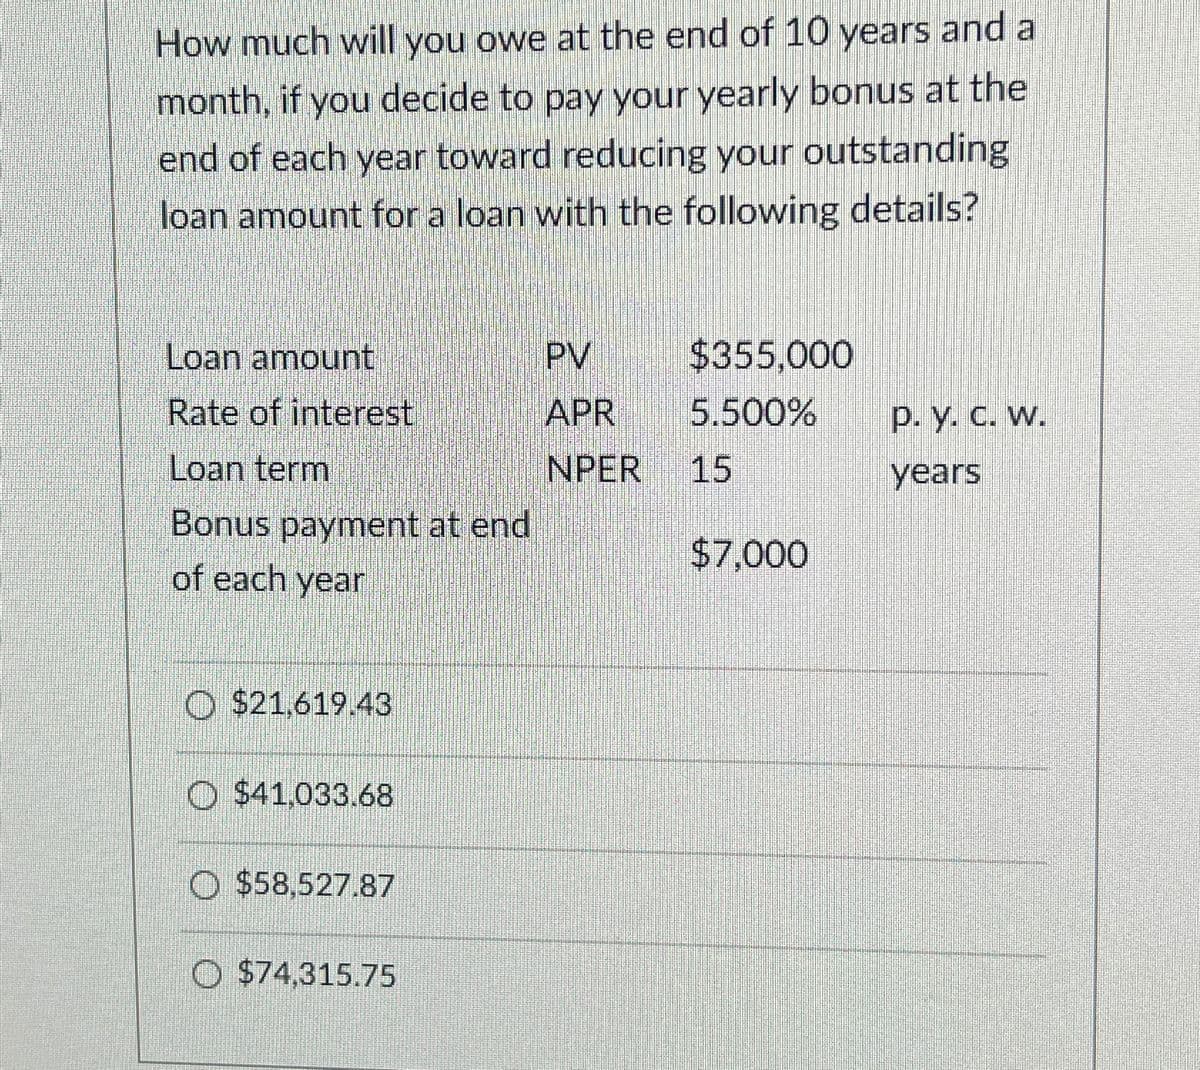 How much will you owe at the end of 10 years and a
month, if you decide to pay your yearly bonus at the
end of each year toward reducing your outstanding
loan amount for a loan with the following details?
Loan amount
PV
$355,000
Rate of interest
APR
5.500%
p. y. c. w.
Loan term
NPER
15
years
Bonus payment at end
$7,000
of each year
$21,619.43
O $41,033.68
$58,527,87
$74,315.75